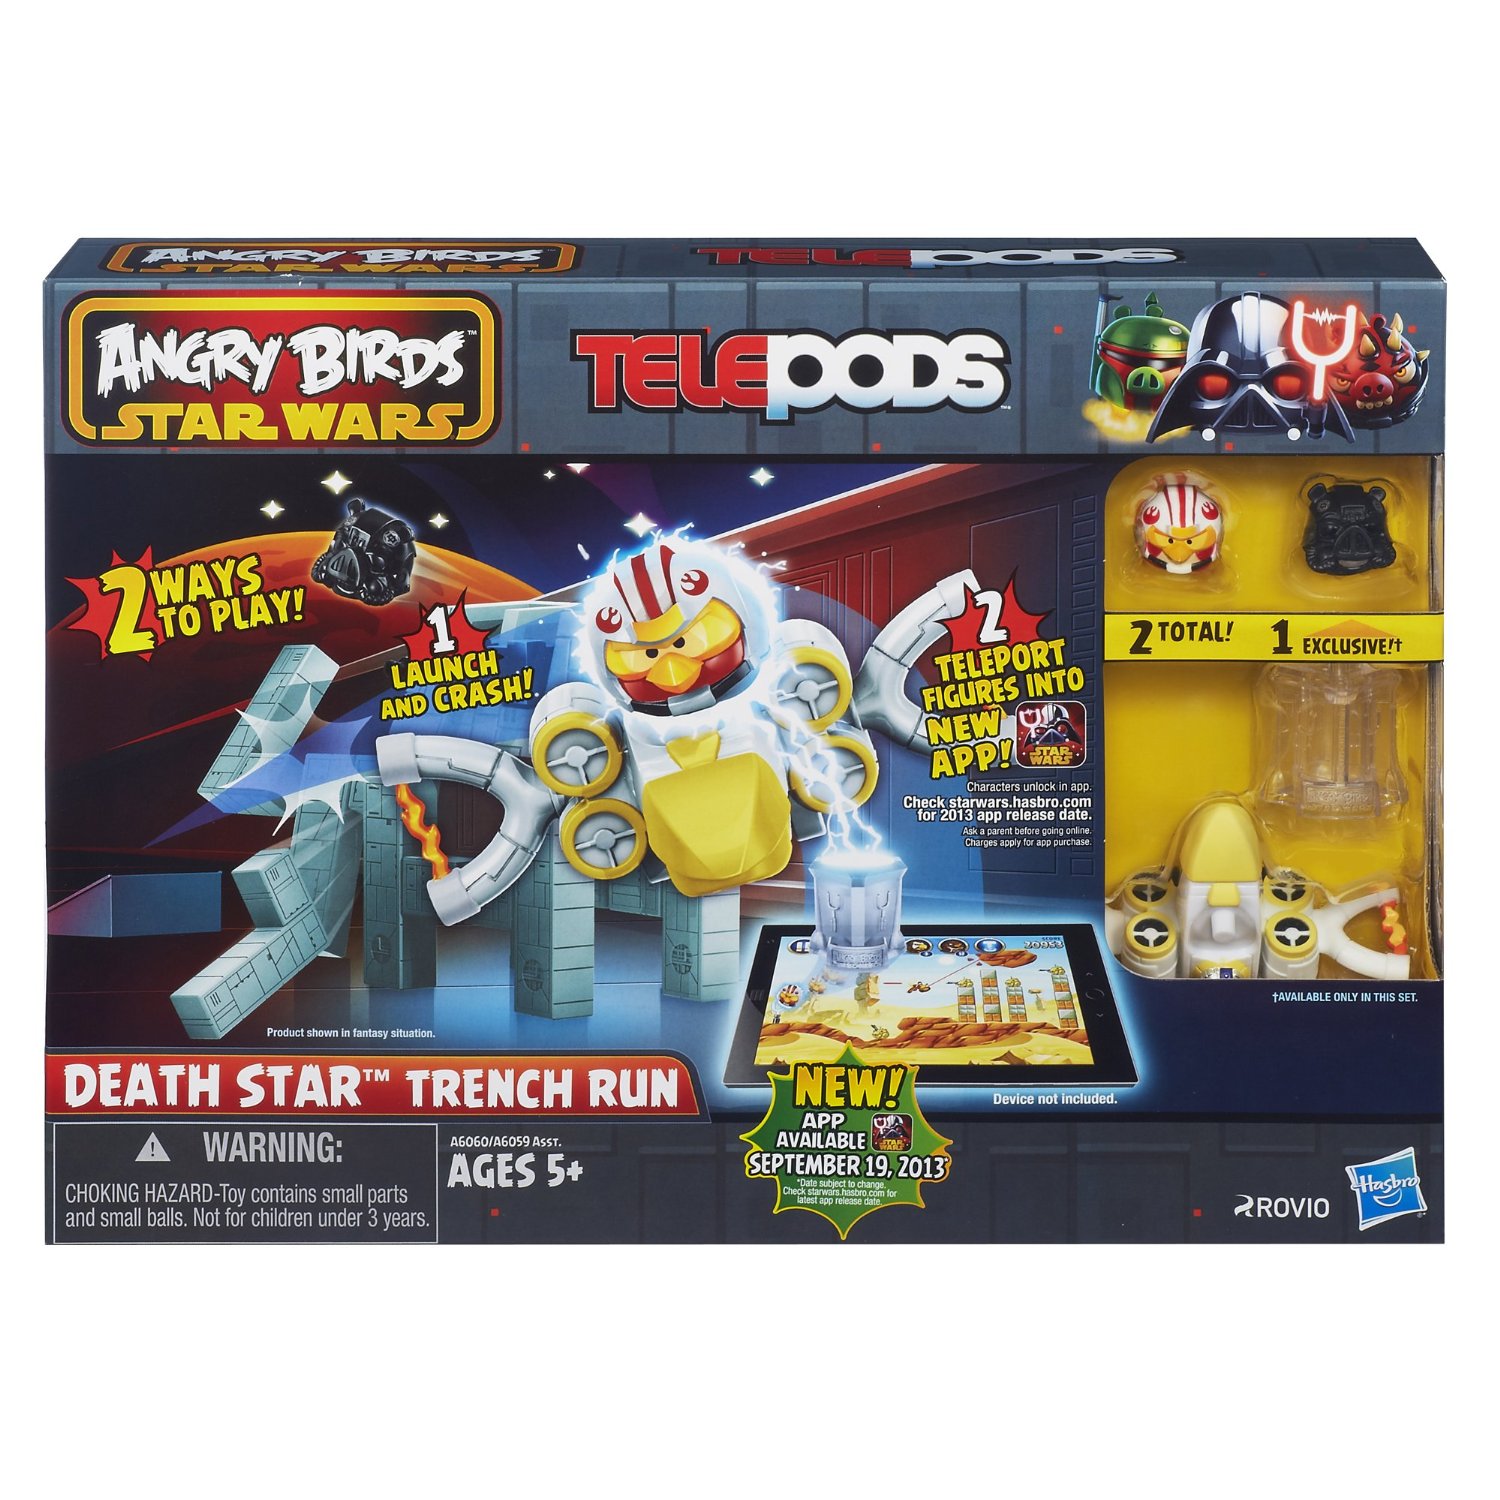 Angry Birds Star Wars Telepods Death Star Trench Run Playset